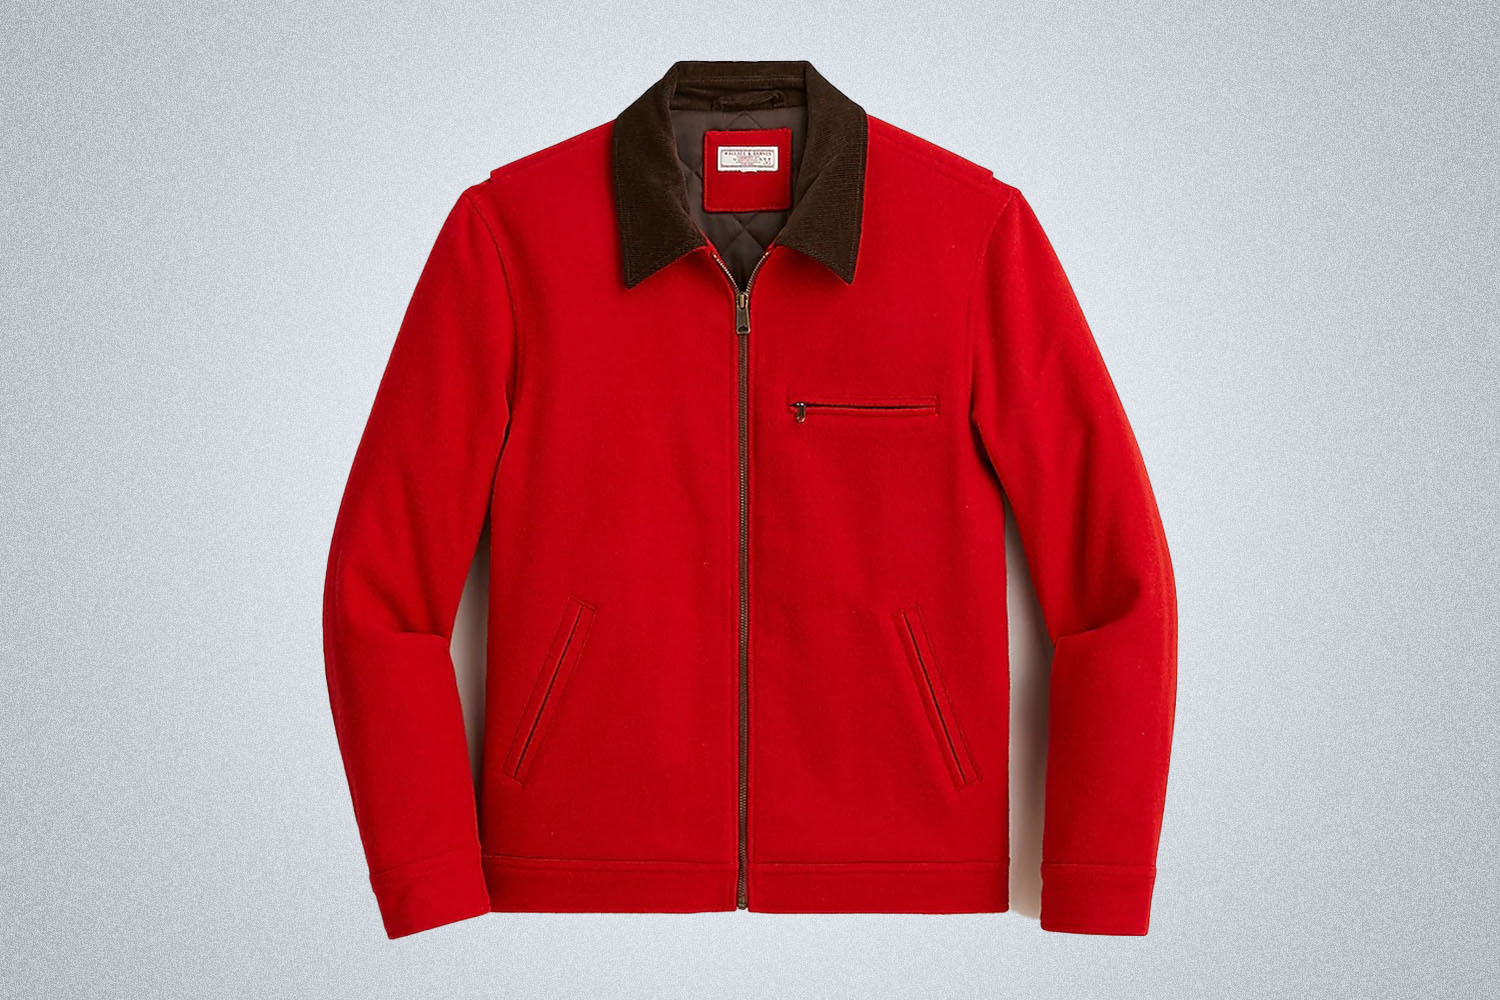 a red wool jacket from J.Crew on a grey background